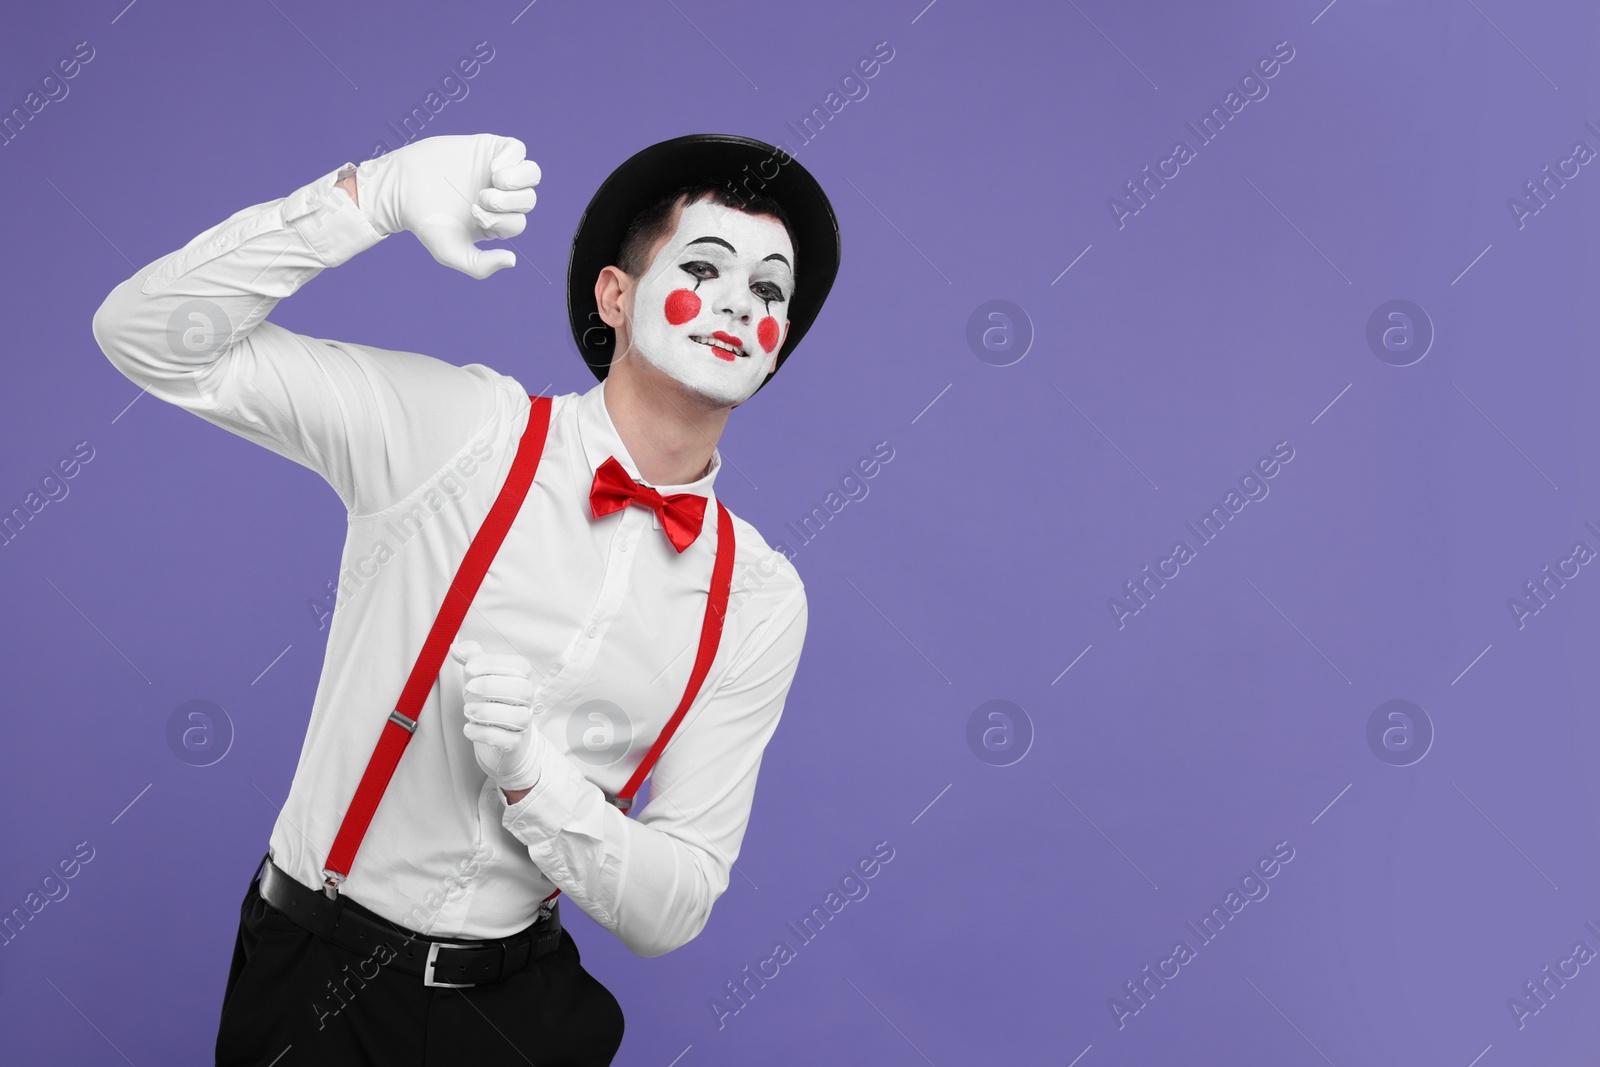 Photo of Funny mime artist in hat posing on purple background. Space for text